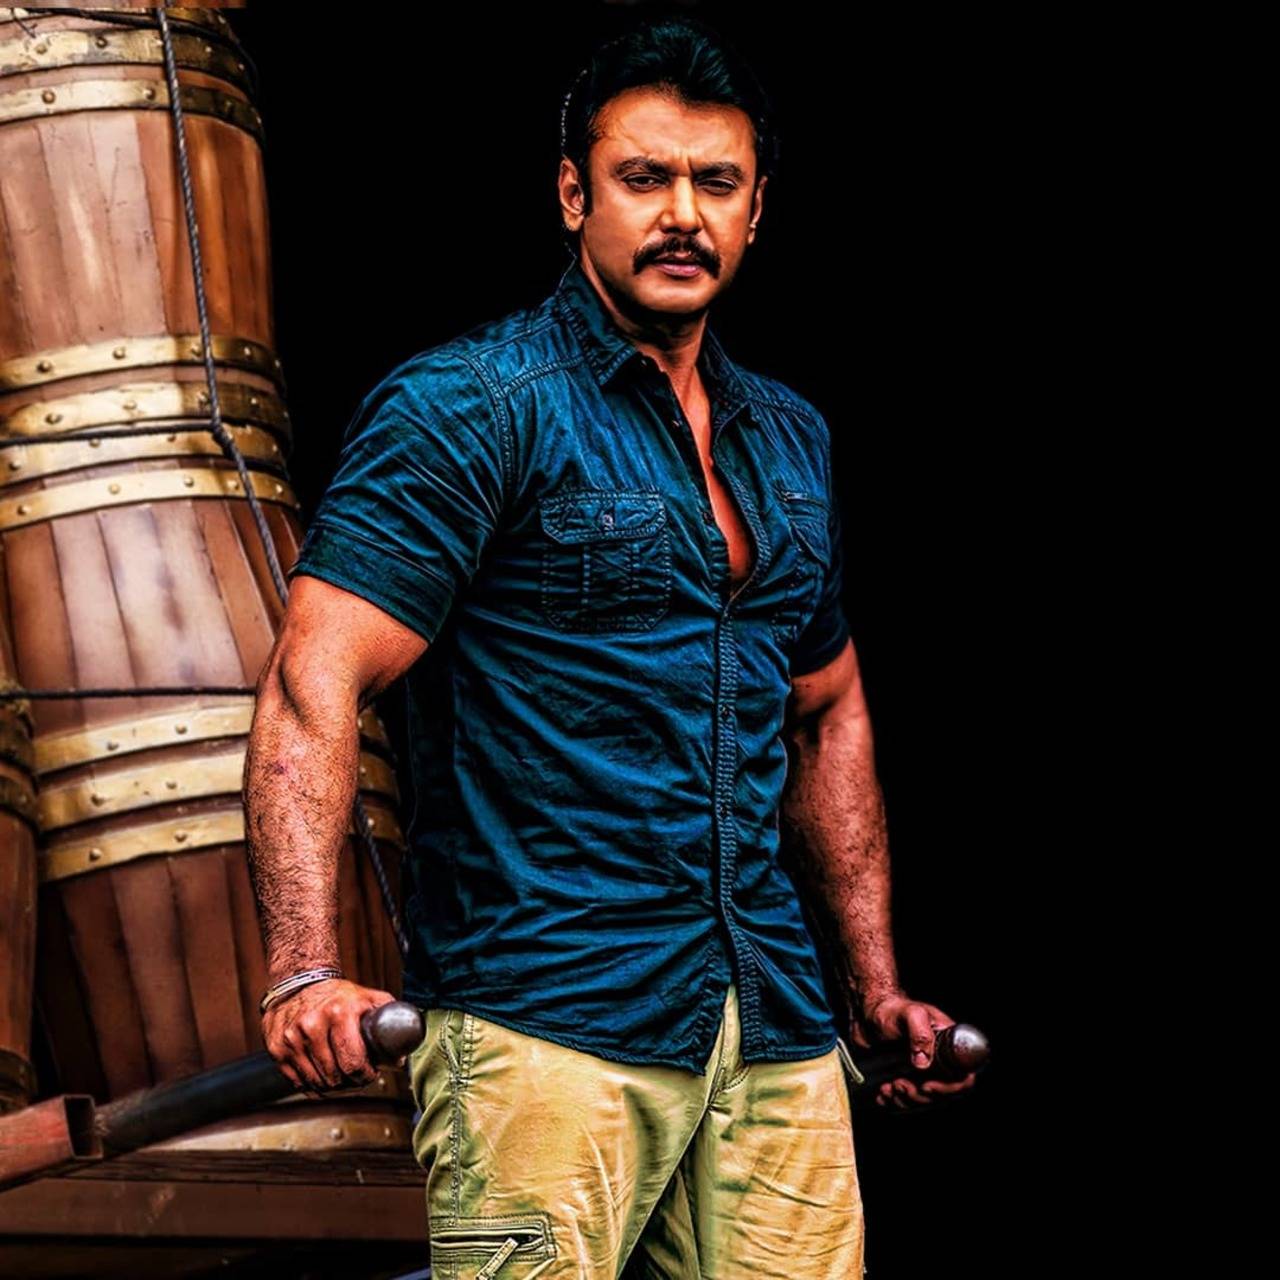 Yajamana world television premiere on August 11 - Times of India